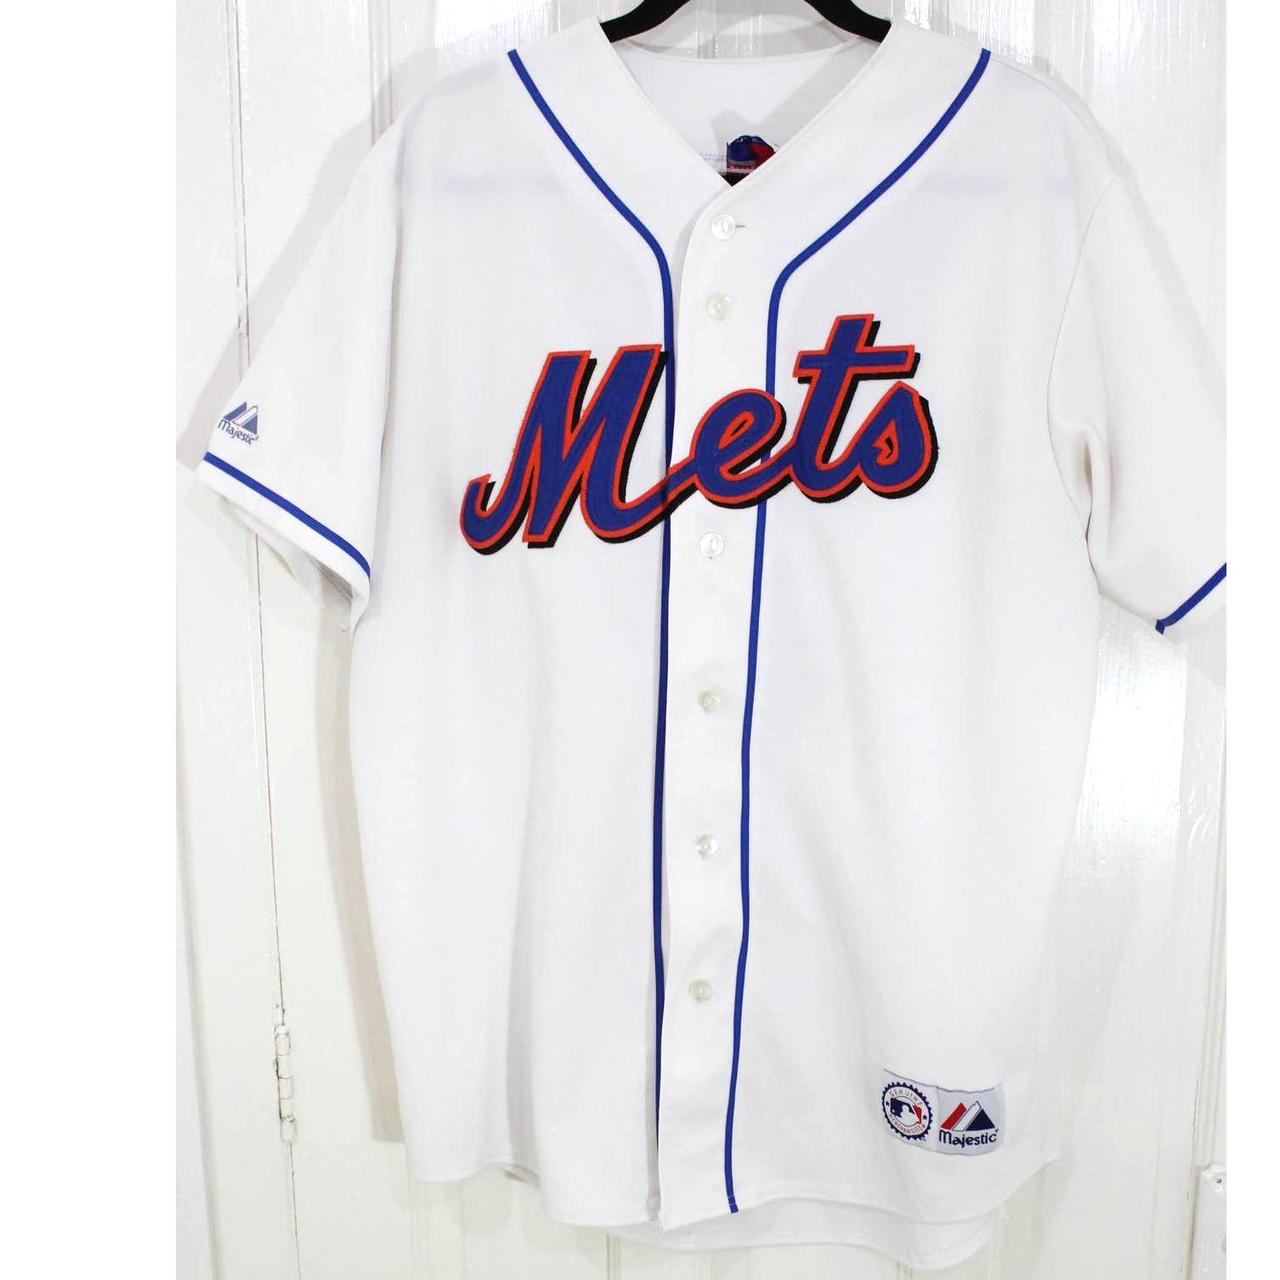 Majestic MLB New York Mets Youth Jersey Size XL Blue - Depop